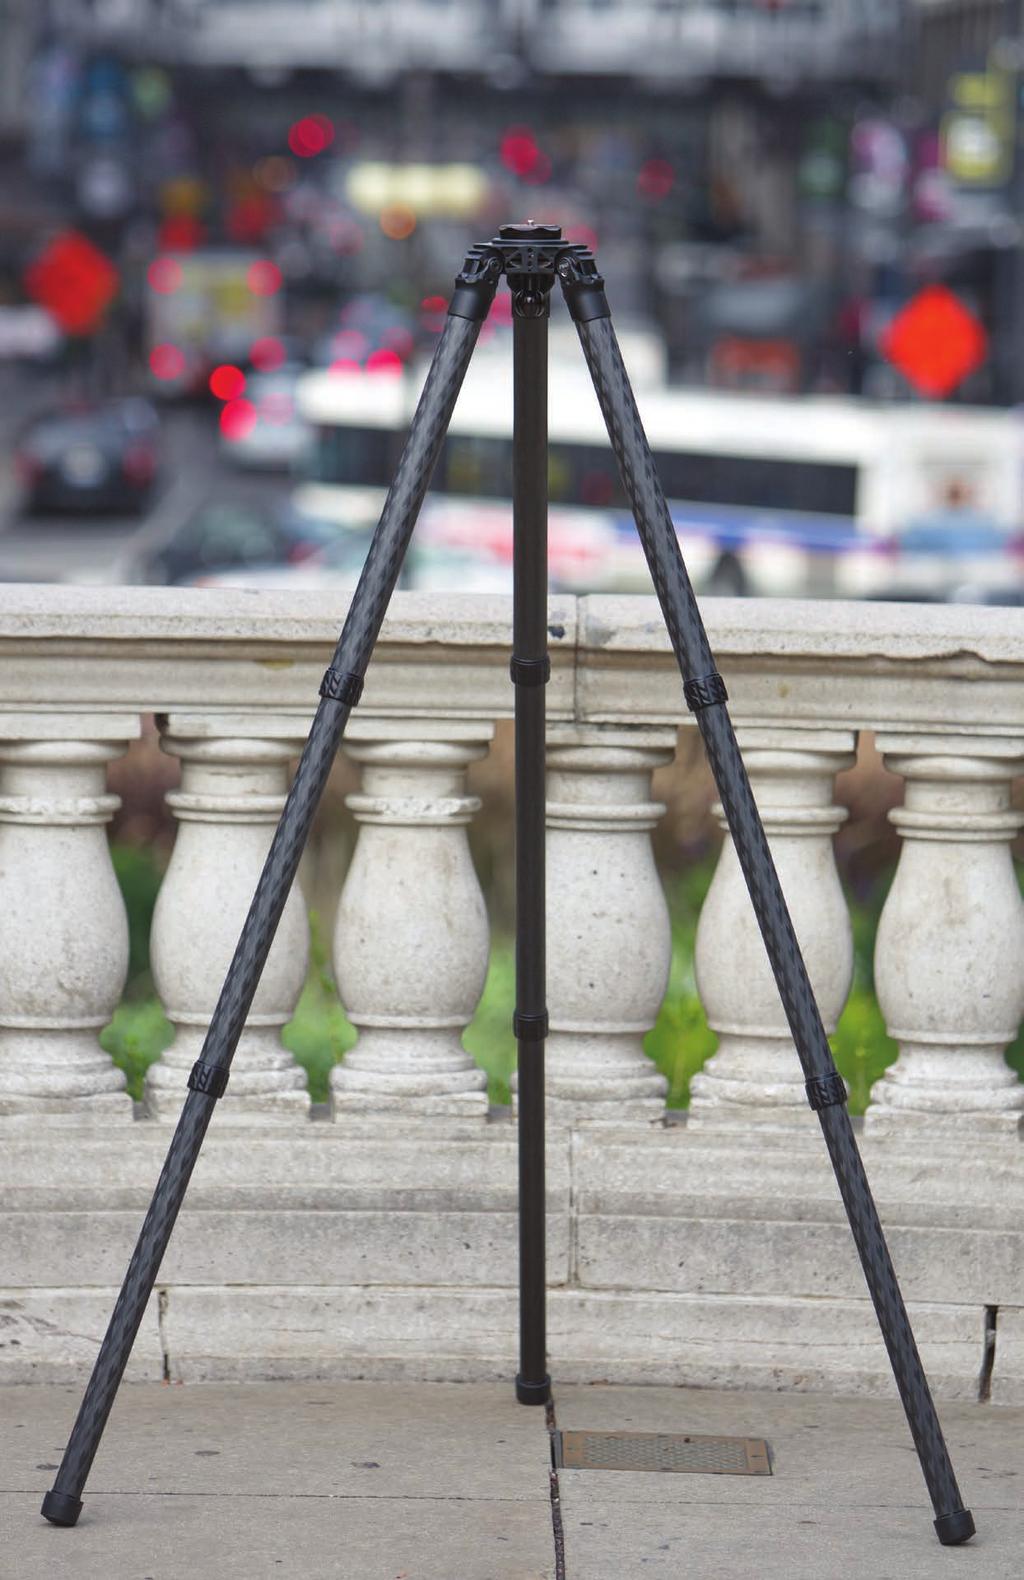 PMG PRO-STIX CARBON FIBER TRIPODS (7-models available) Aluminum Truss Apex Construction. Multiple 1/4-20 Threaded Adapters on Apex Creates Direct Mounting points for Accessories!